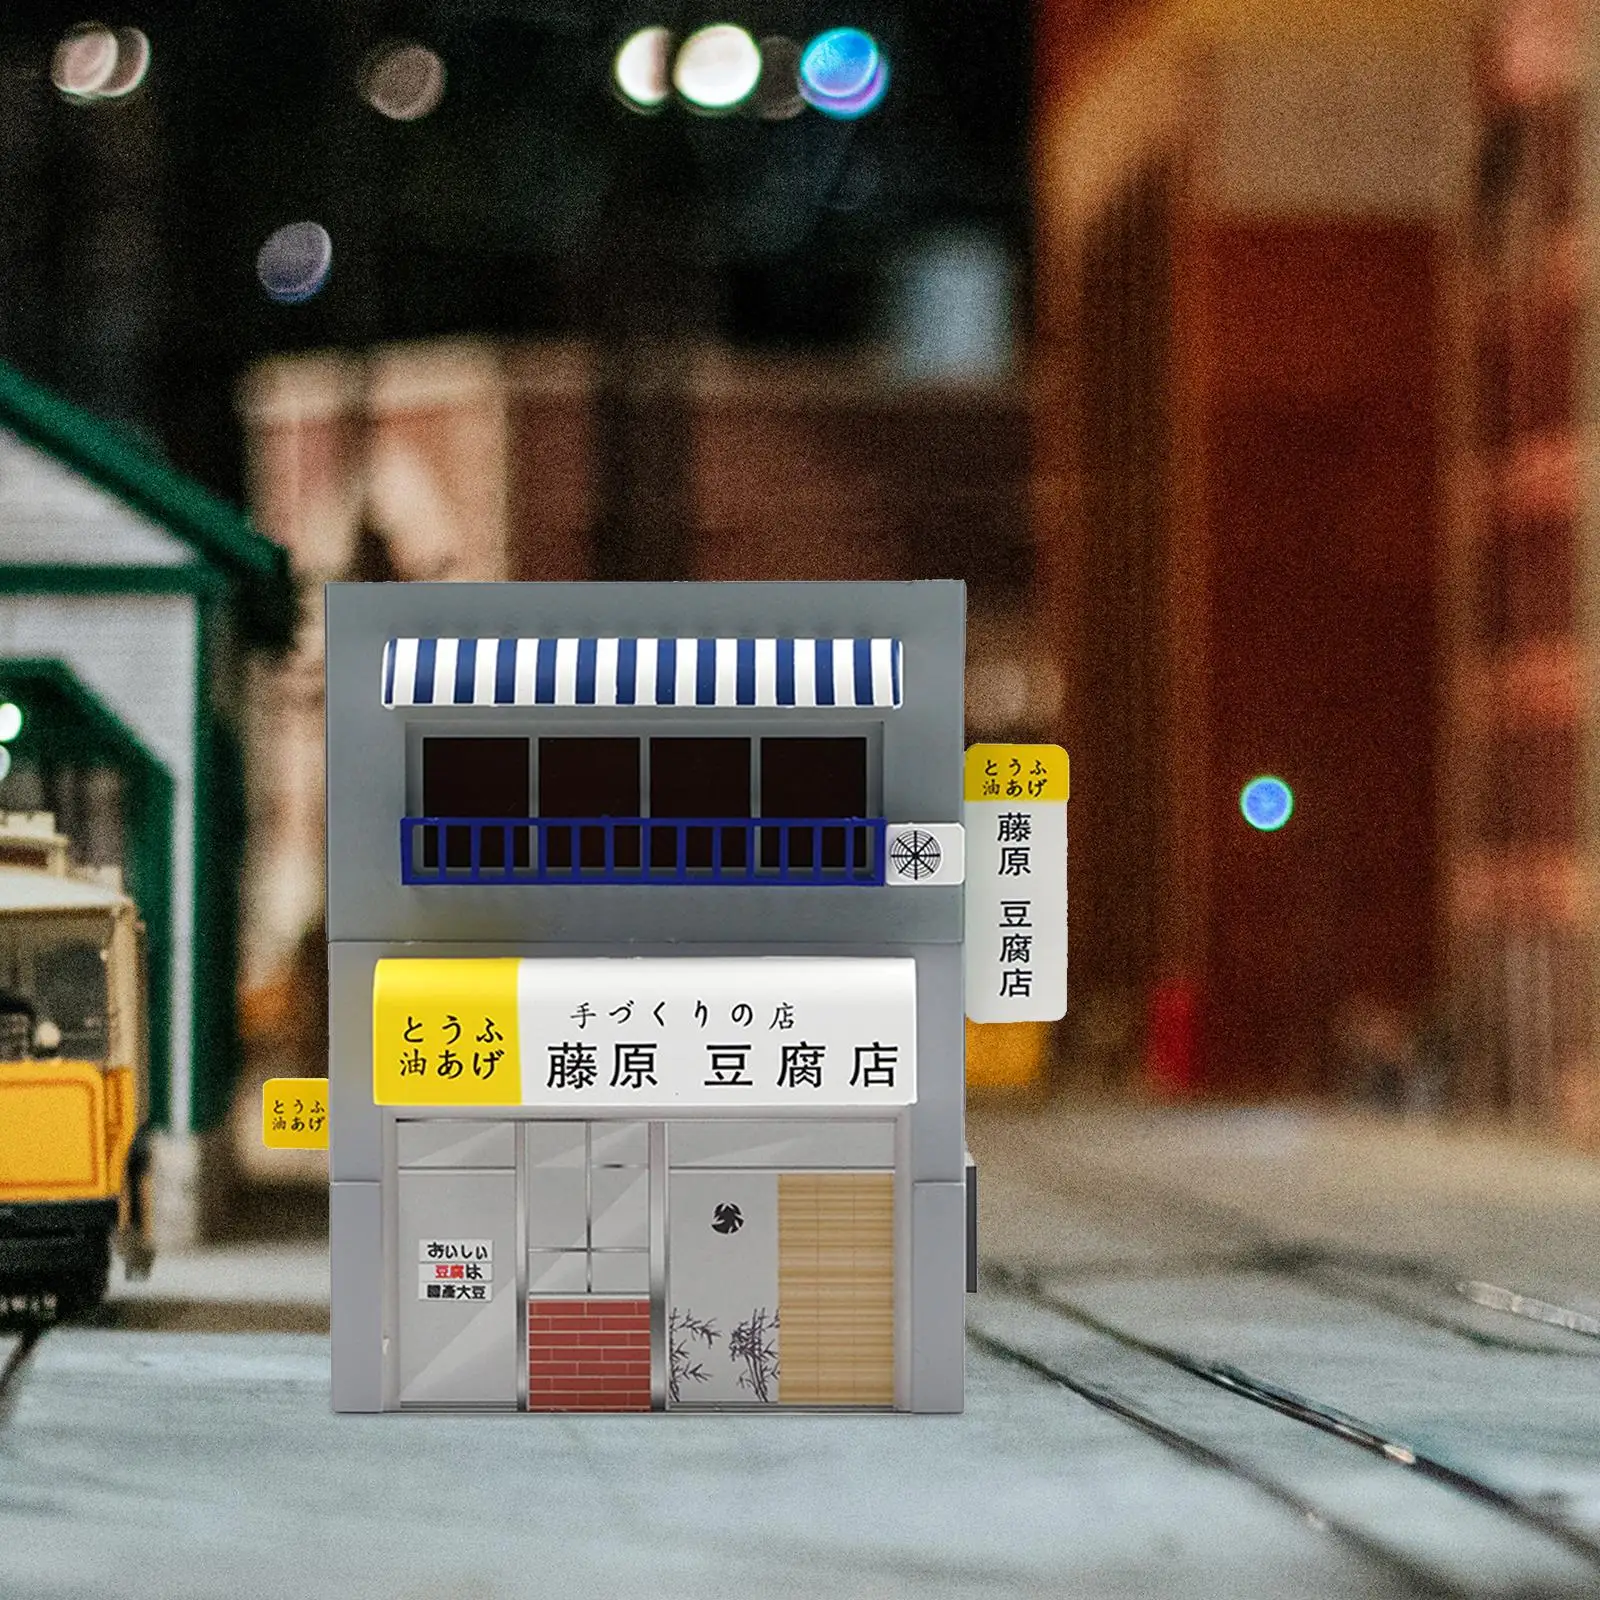 1/64 Tofu Shop Diorama Model Architectural Movie Props Desktop S Gauge Collection Scenery Scenery Store Townscape Decoration